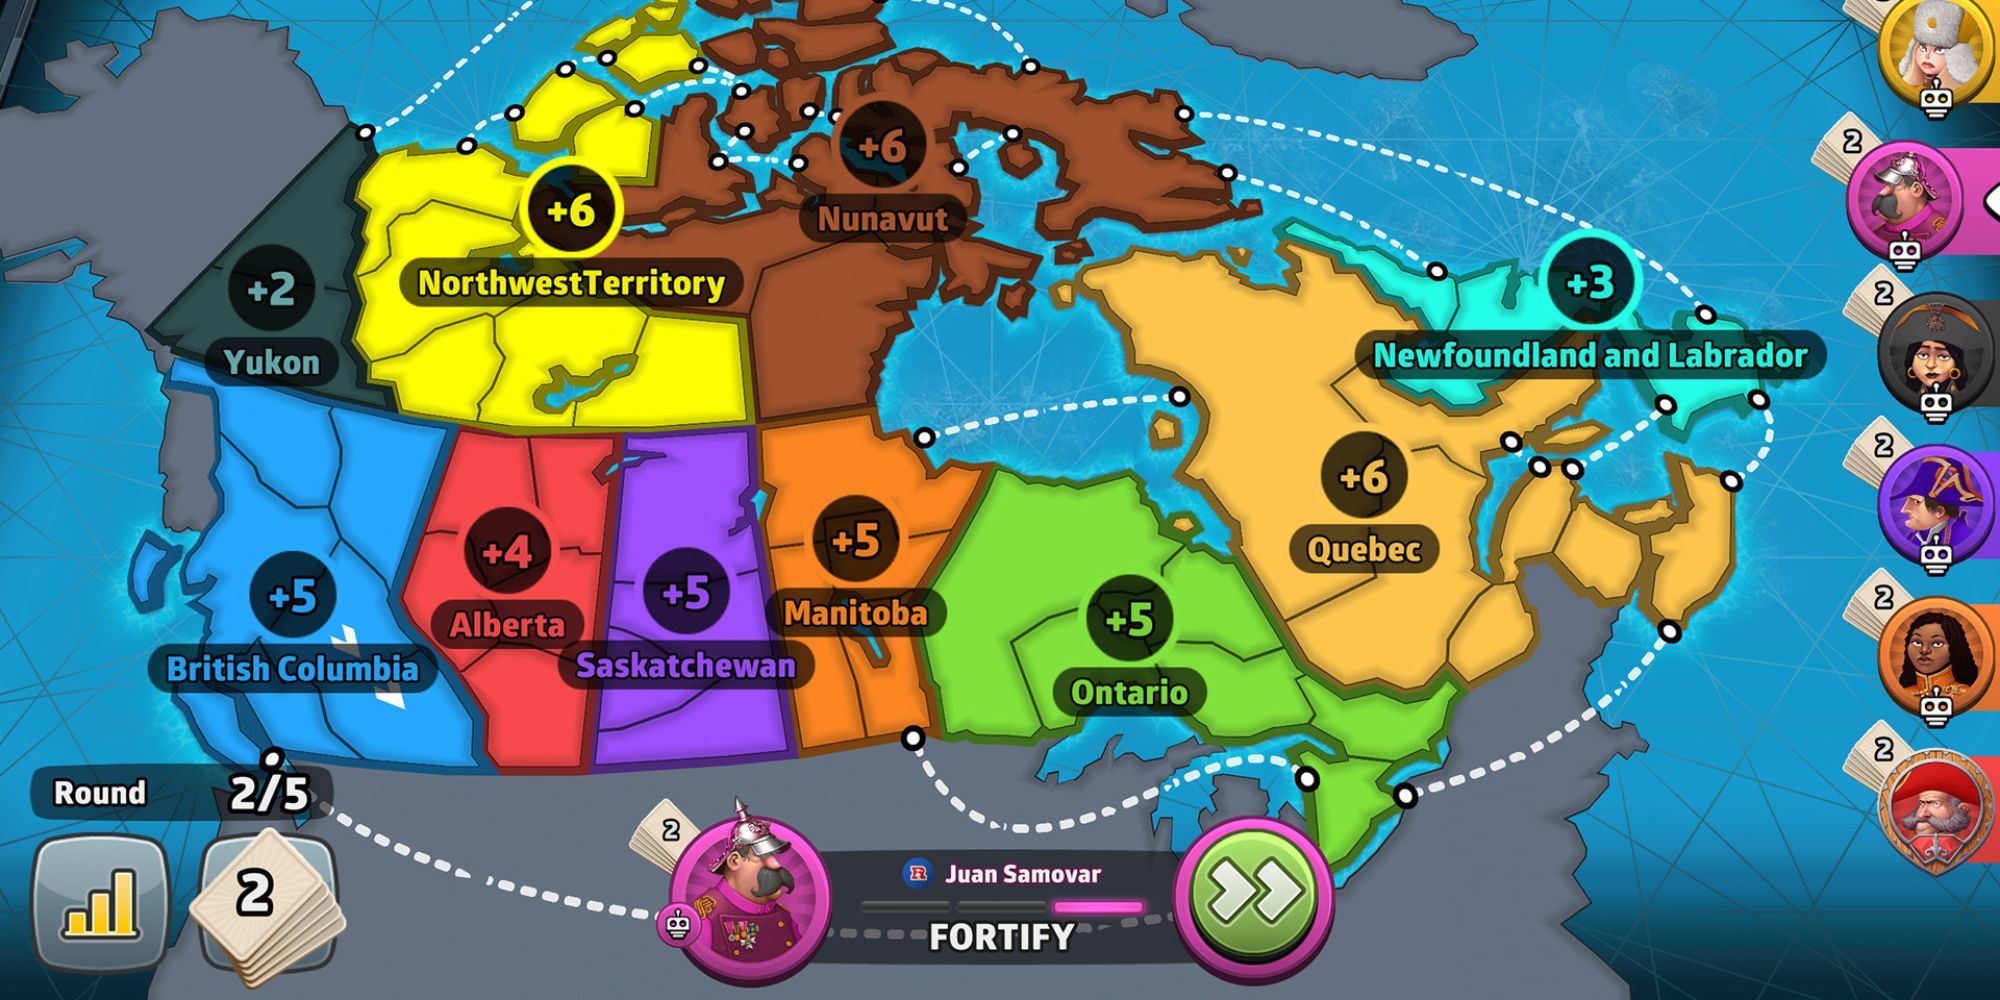 A game of Risk: Global Domination